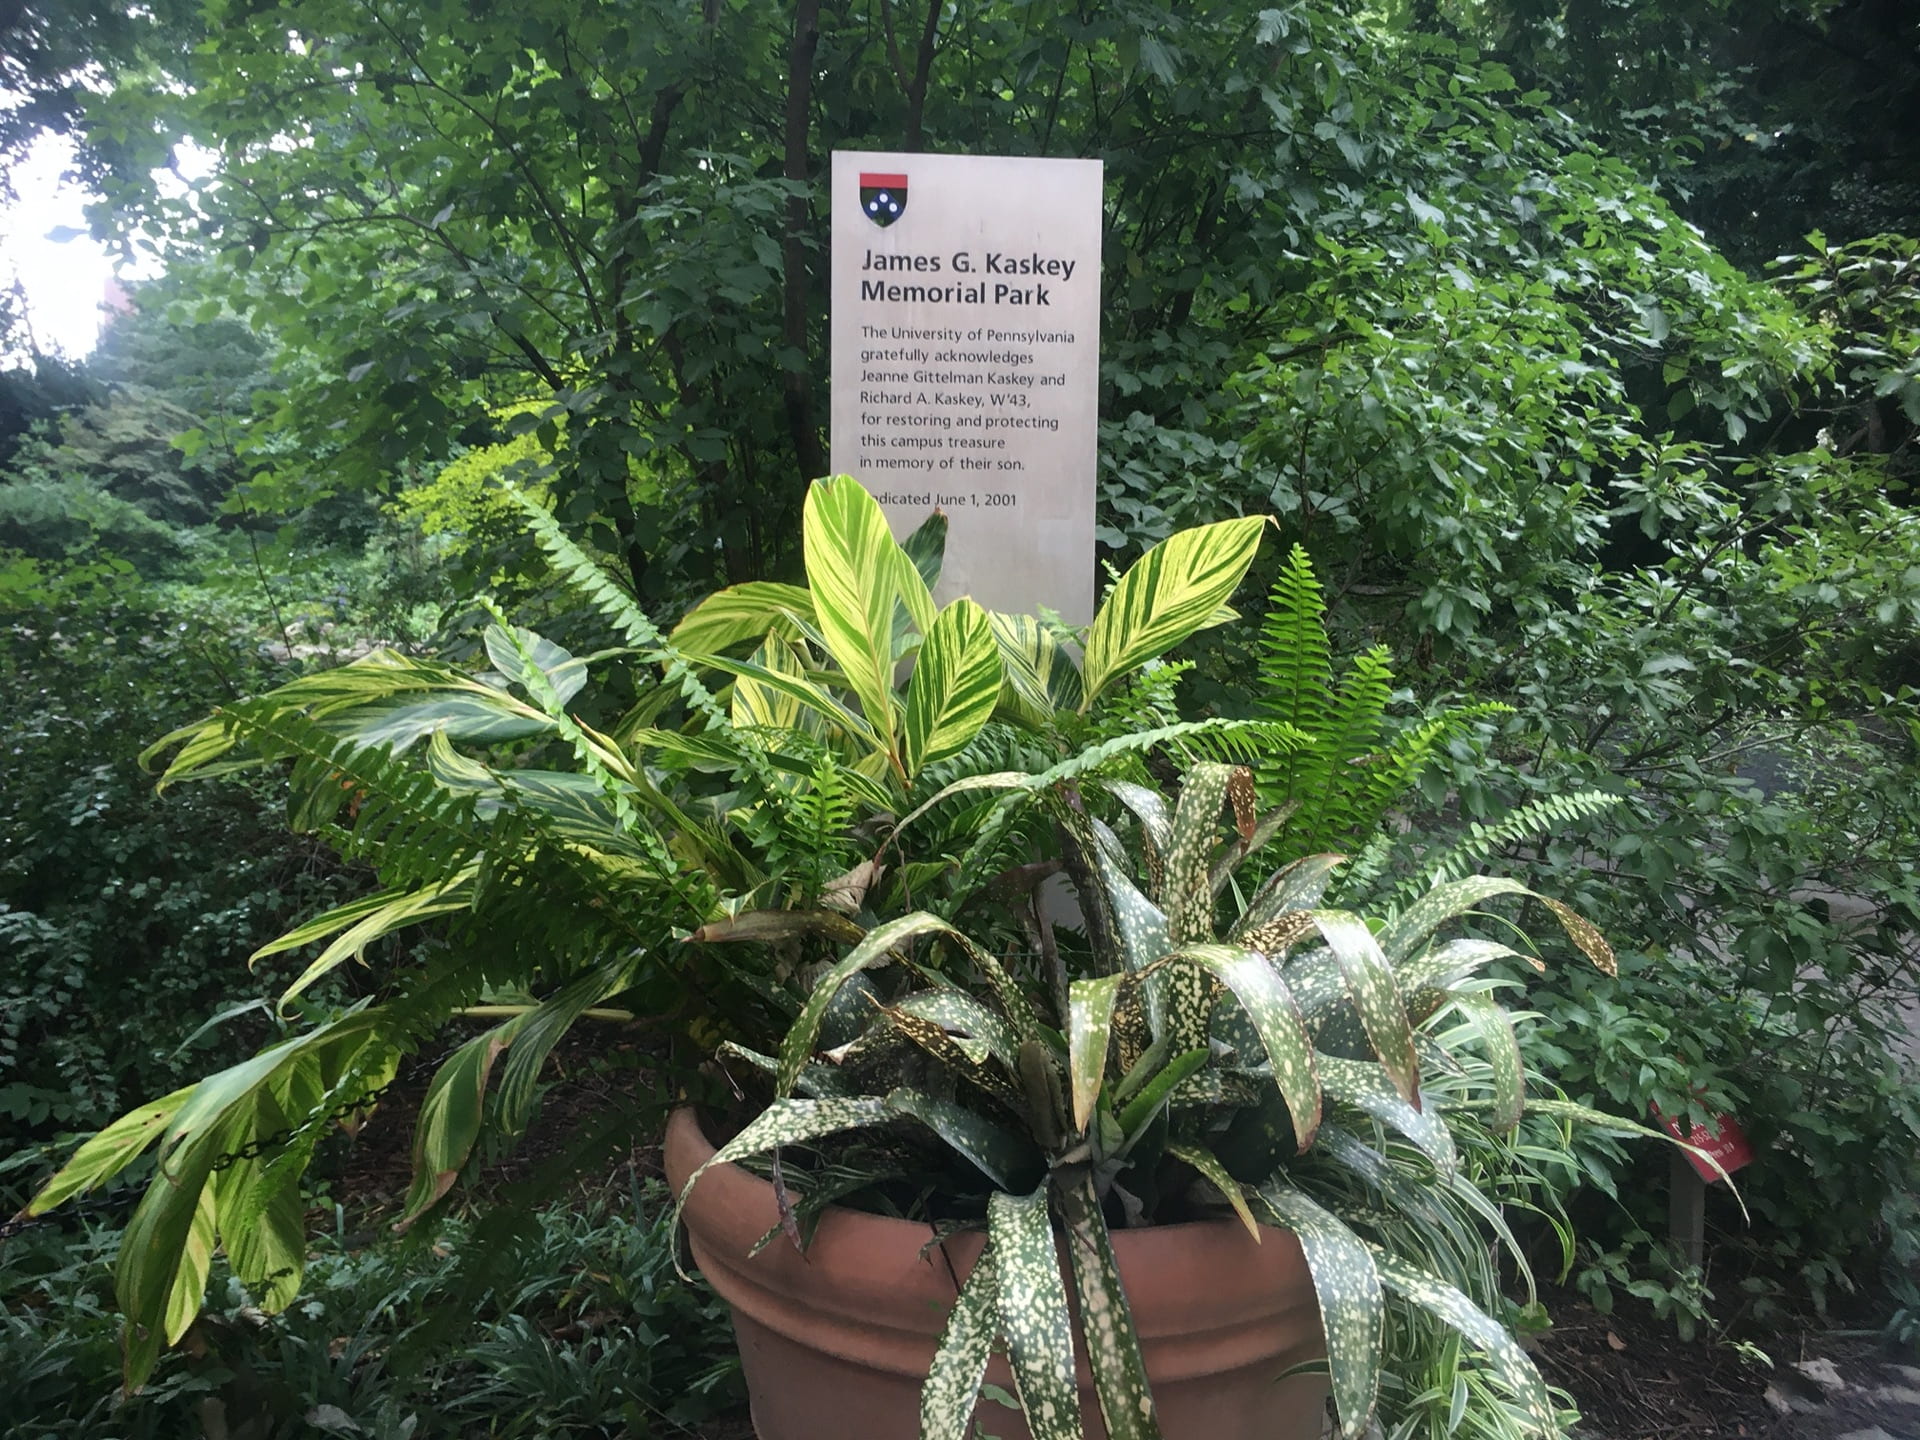 A tropical container display welcomes visitors to the park.